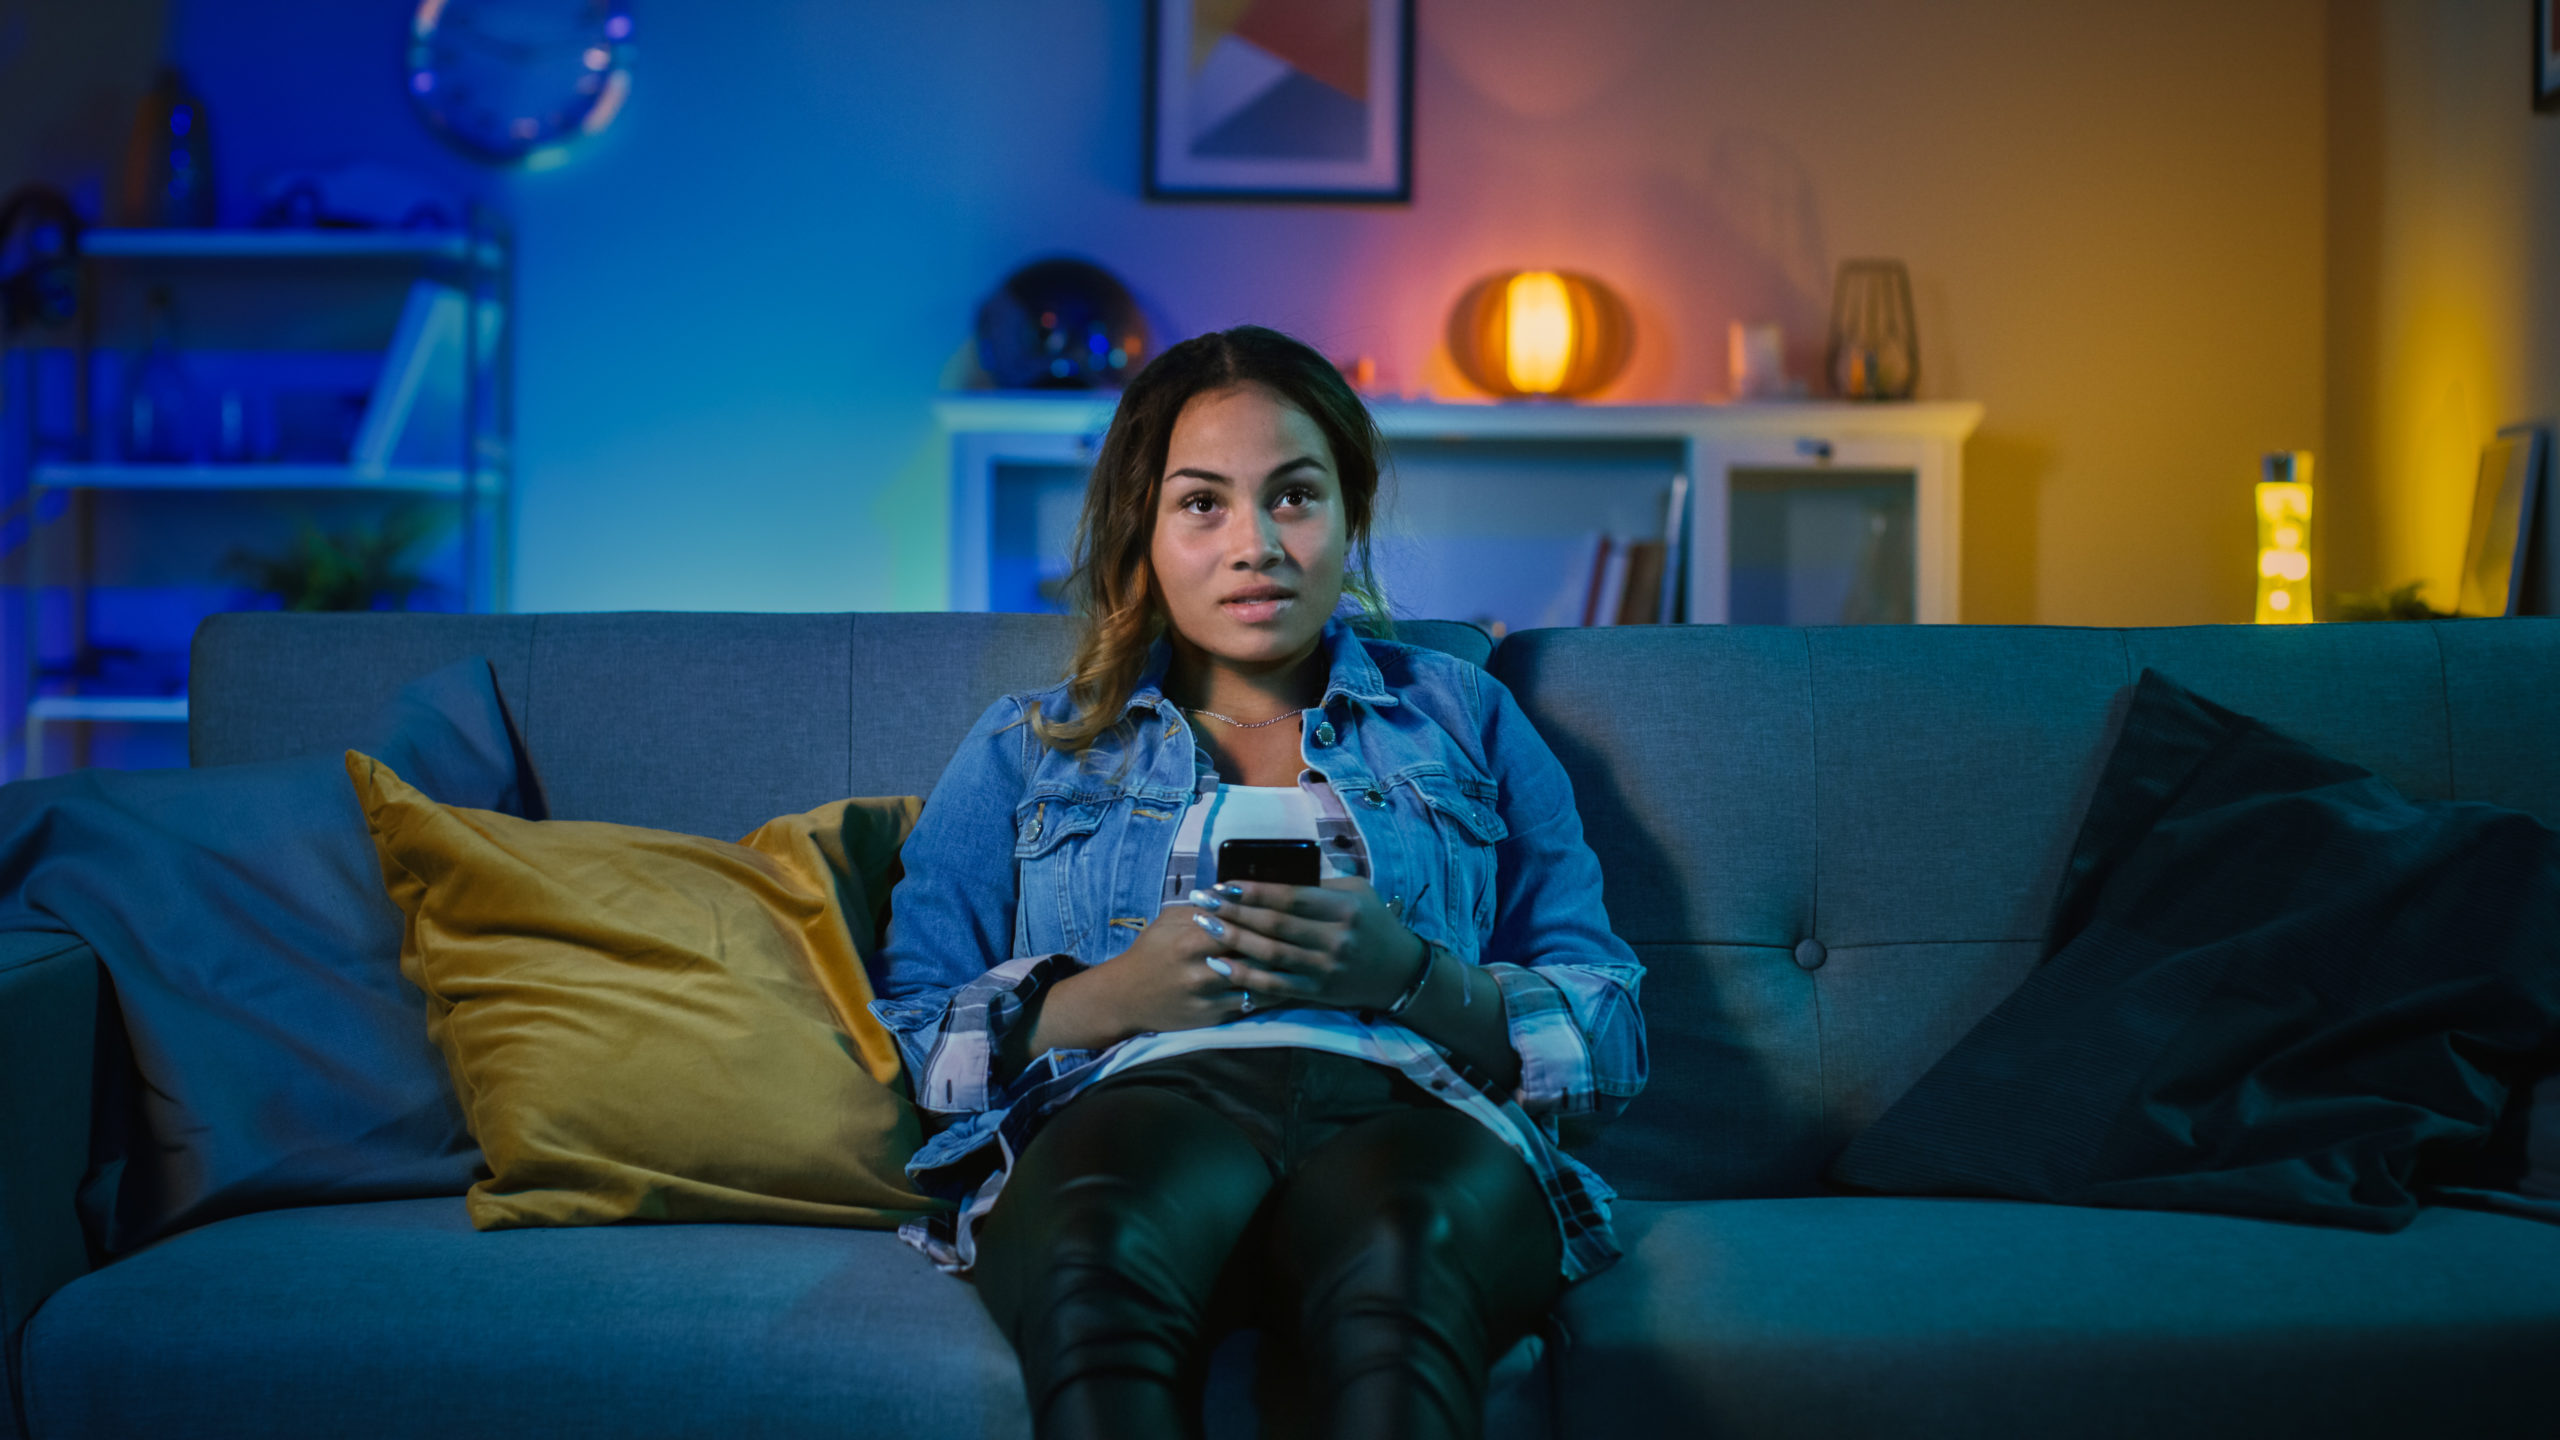 Girl sitting on a sofa holding her phone looking at TV